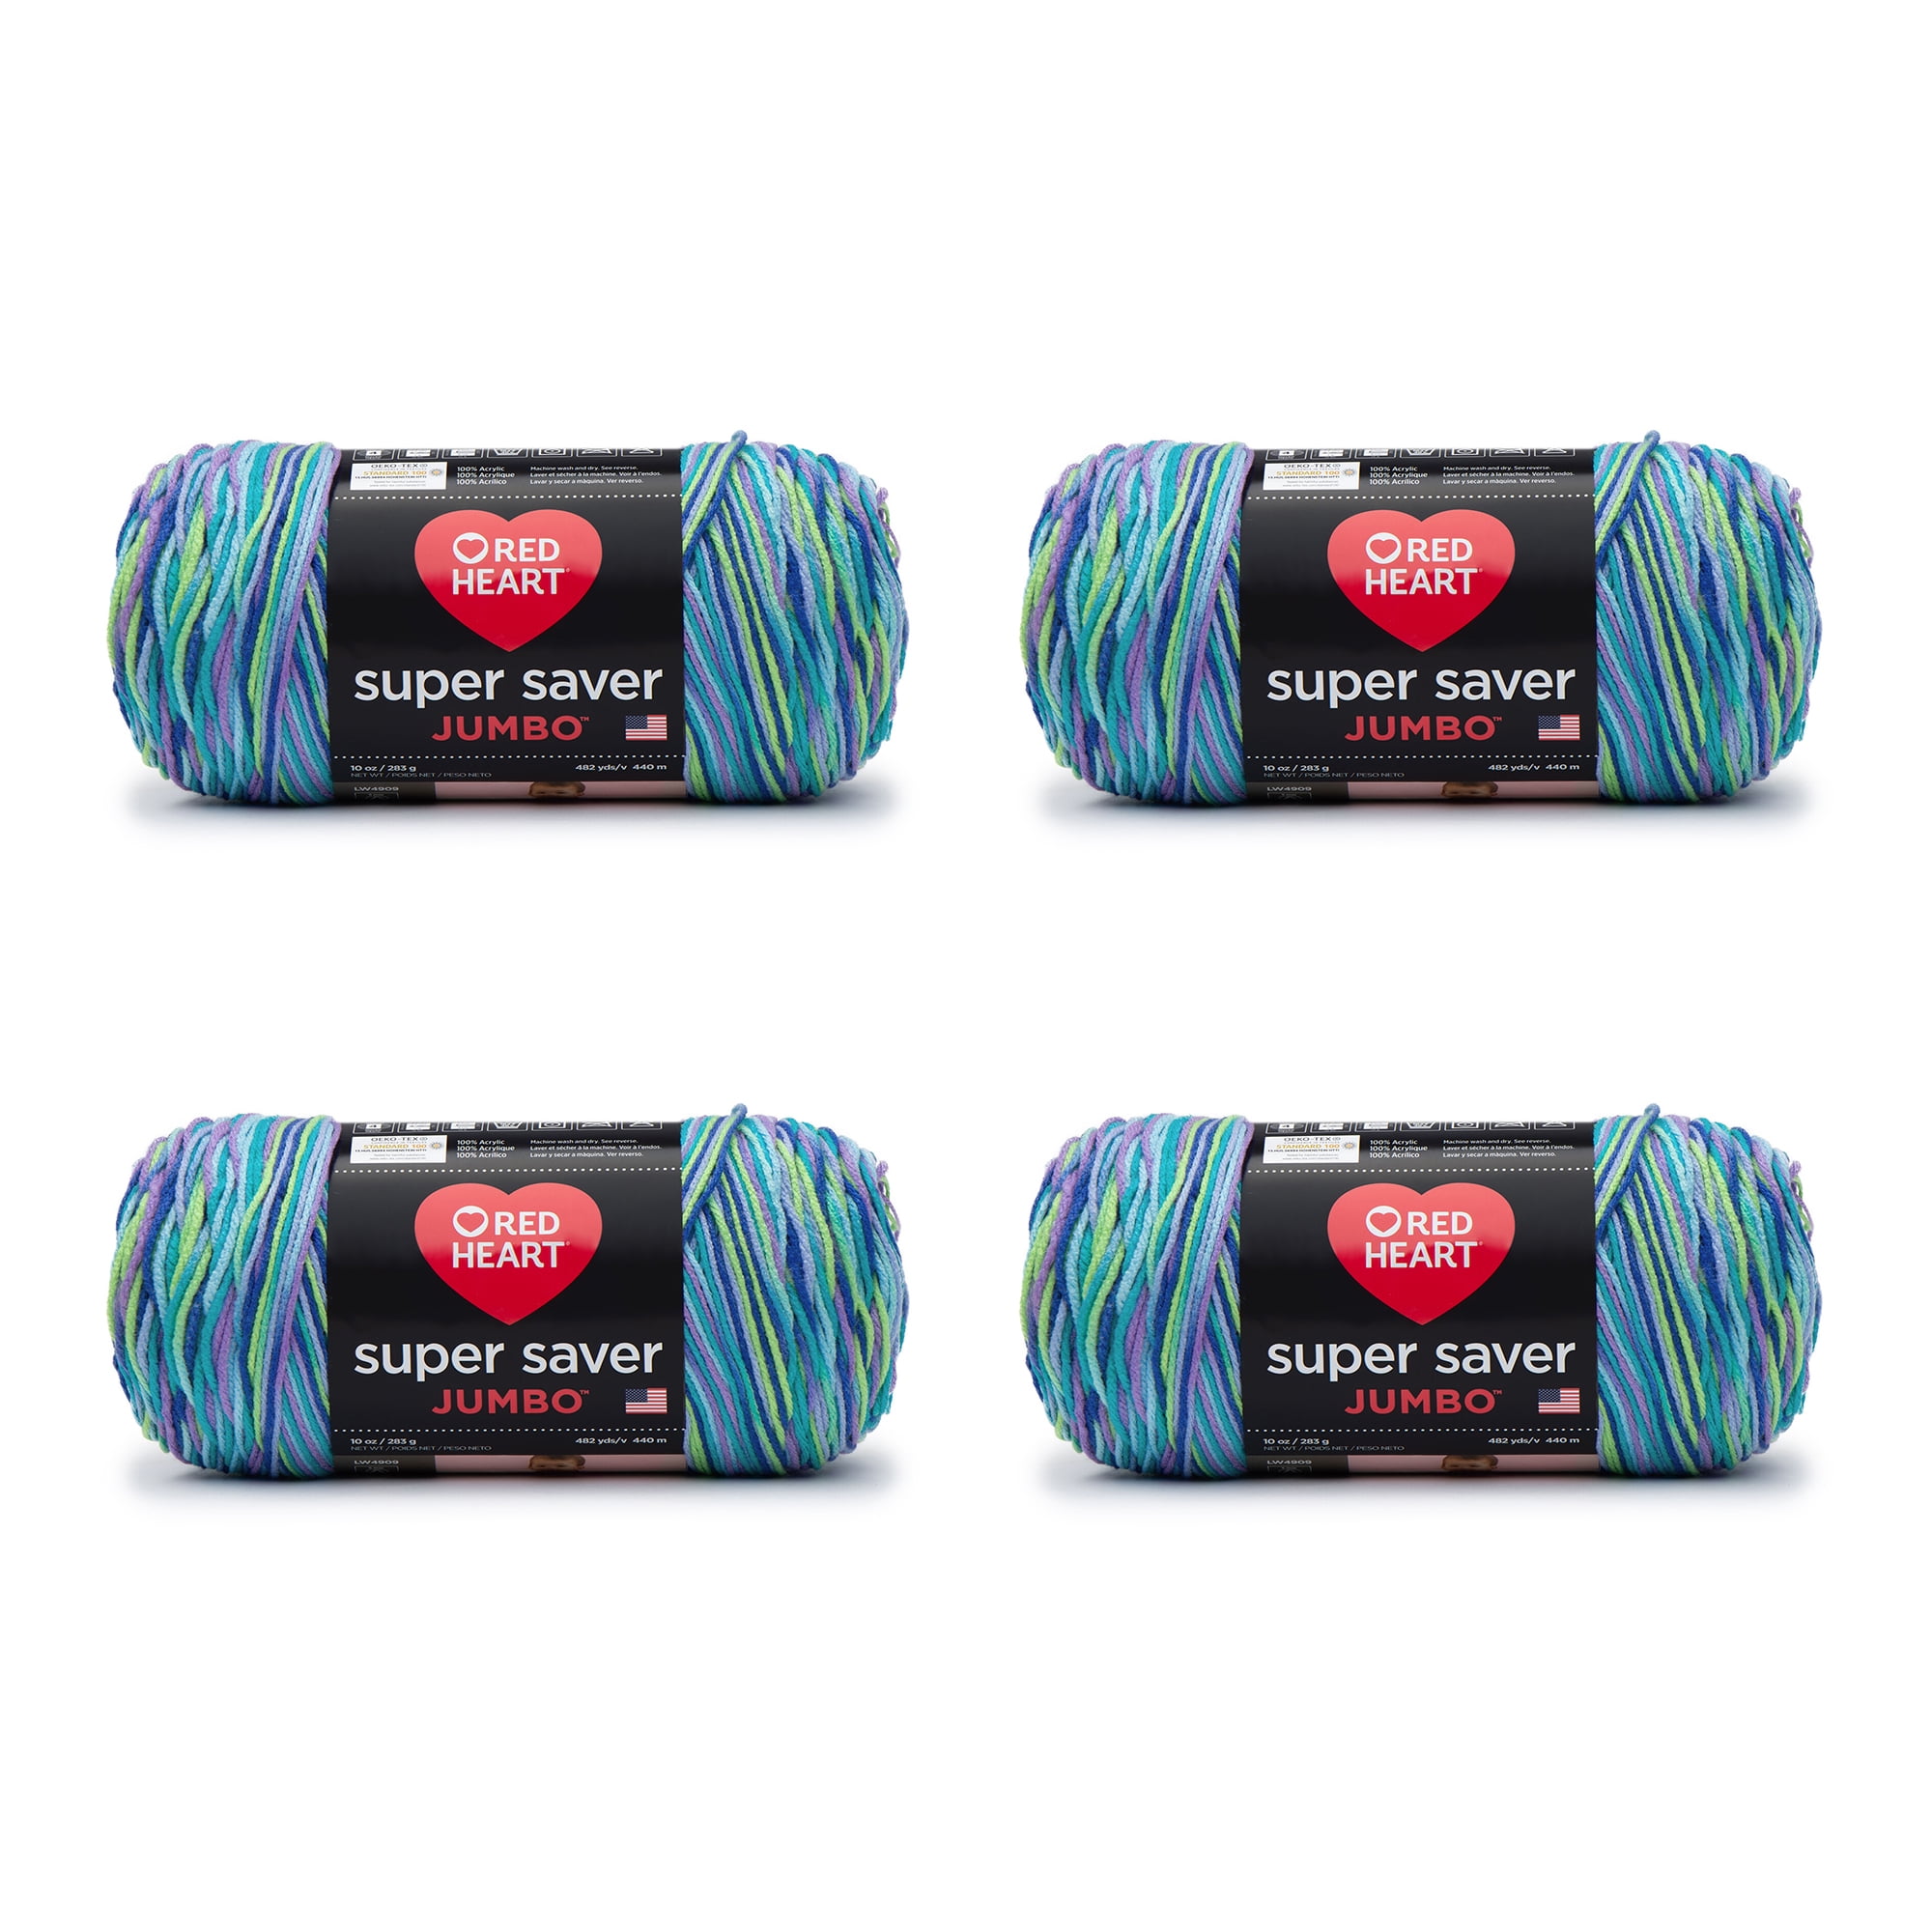 Red Heart Super Saver Yarn, 3 Pack, Mirage 3 Count